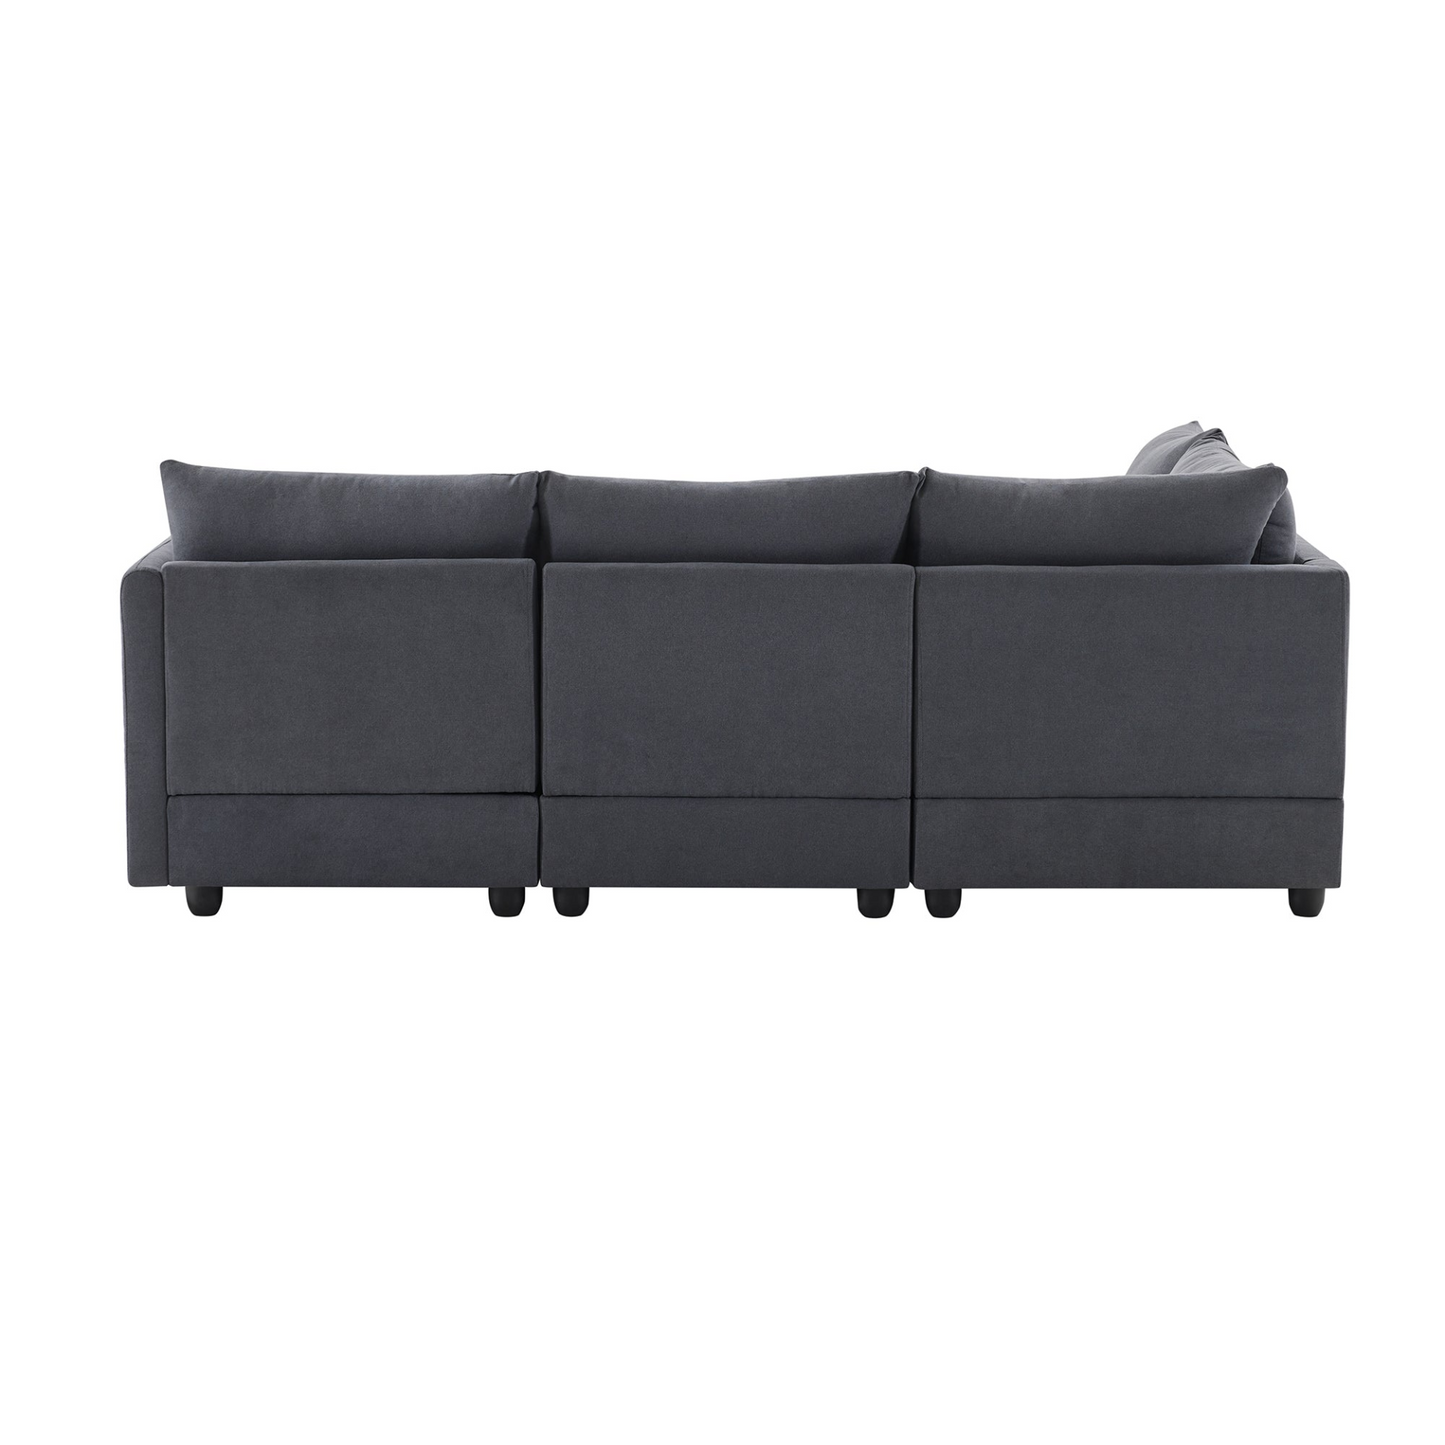 89*79"Modern Sectional Sofa with Vertical Stripes,2 Pillows,5-Seat Couch with Convertible Ottoman,Various Combinations,L-Shape Indoor Furniture for Living Room,Apartment, 3 Colors